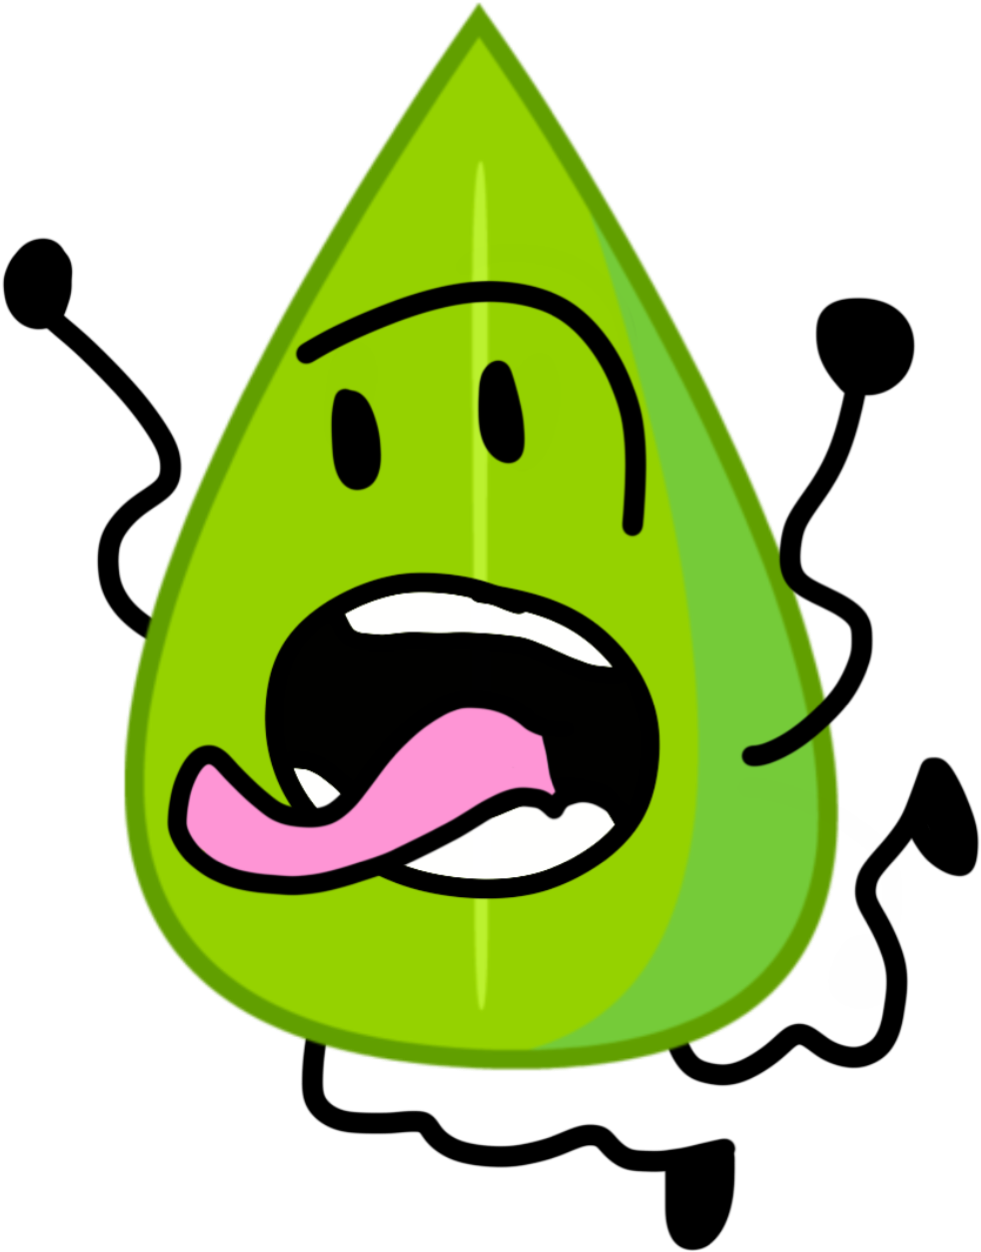 A Cartoon Of A Leaf With A Face And Mouth